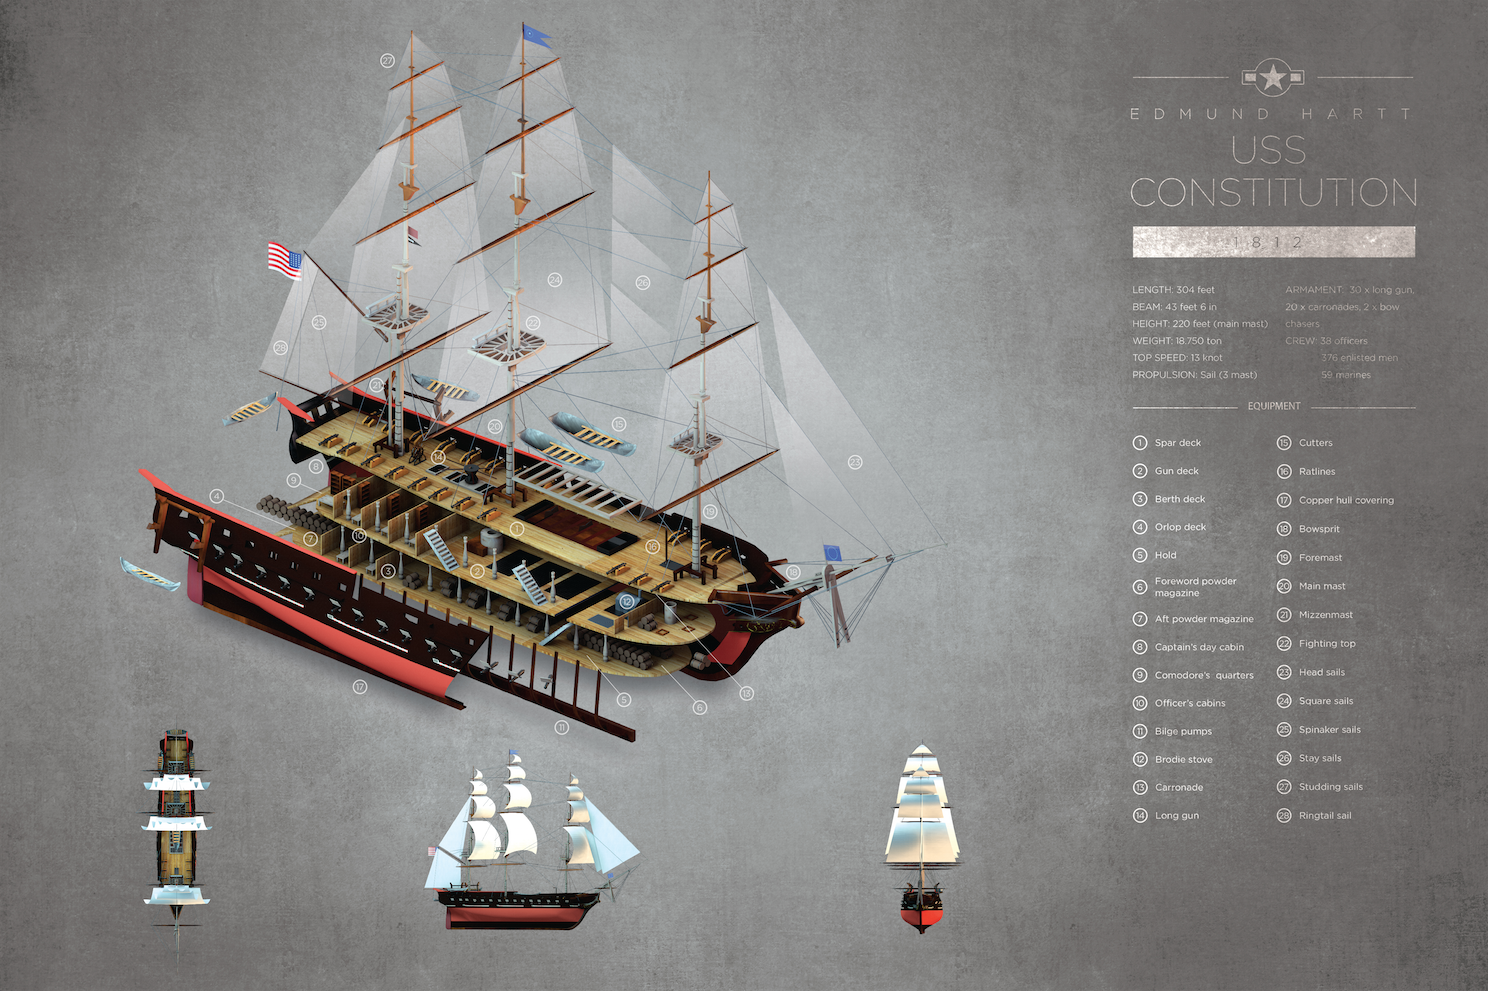 sku-constitution-uss-constitution-ship-exploded-view-poster